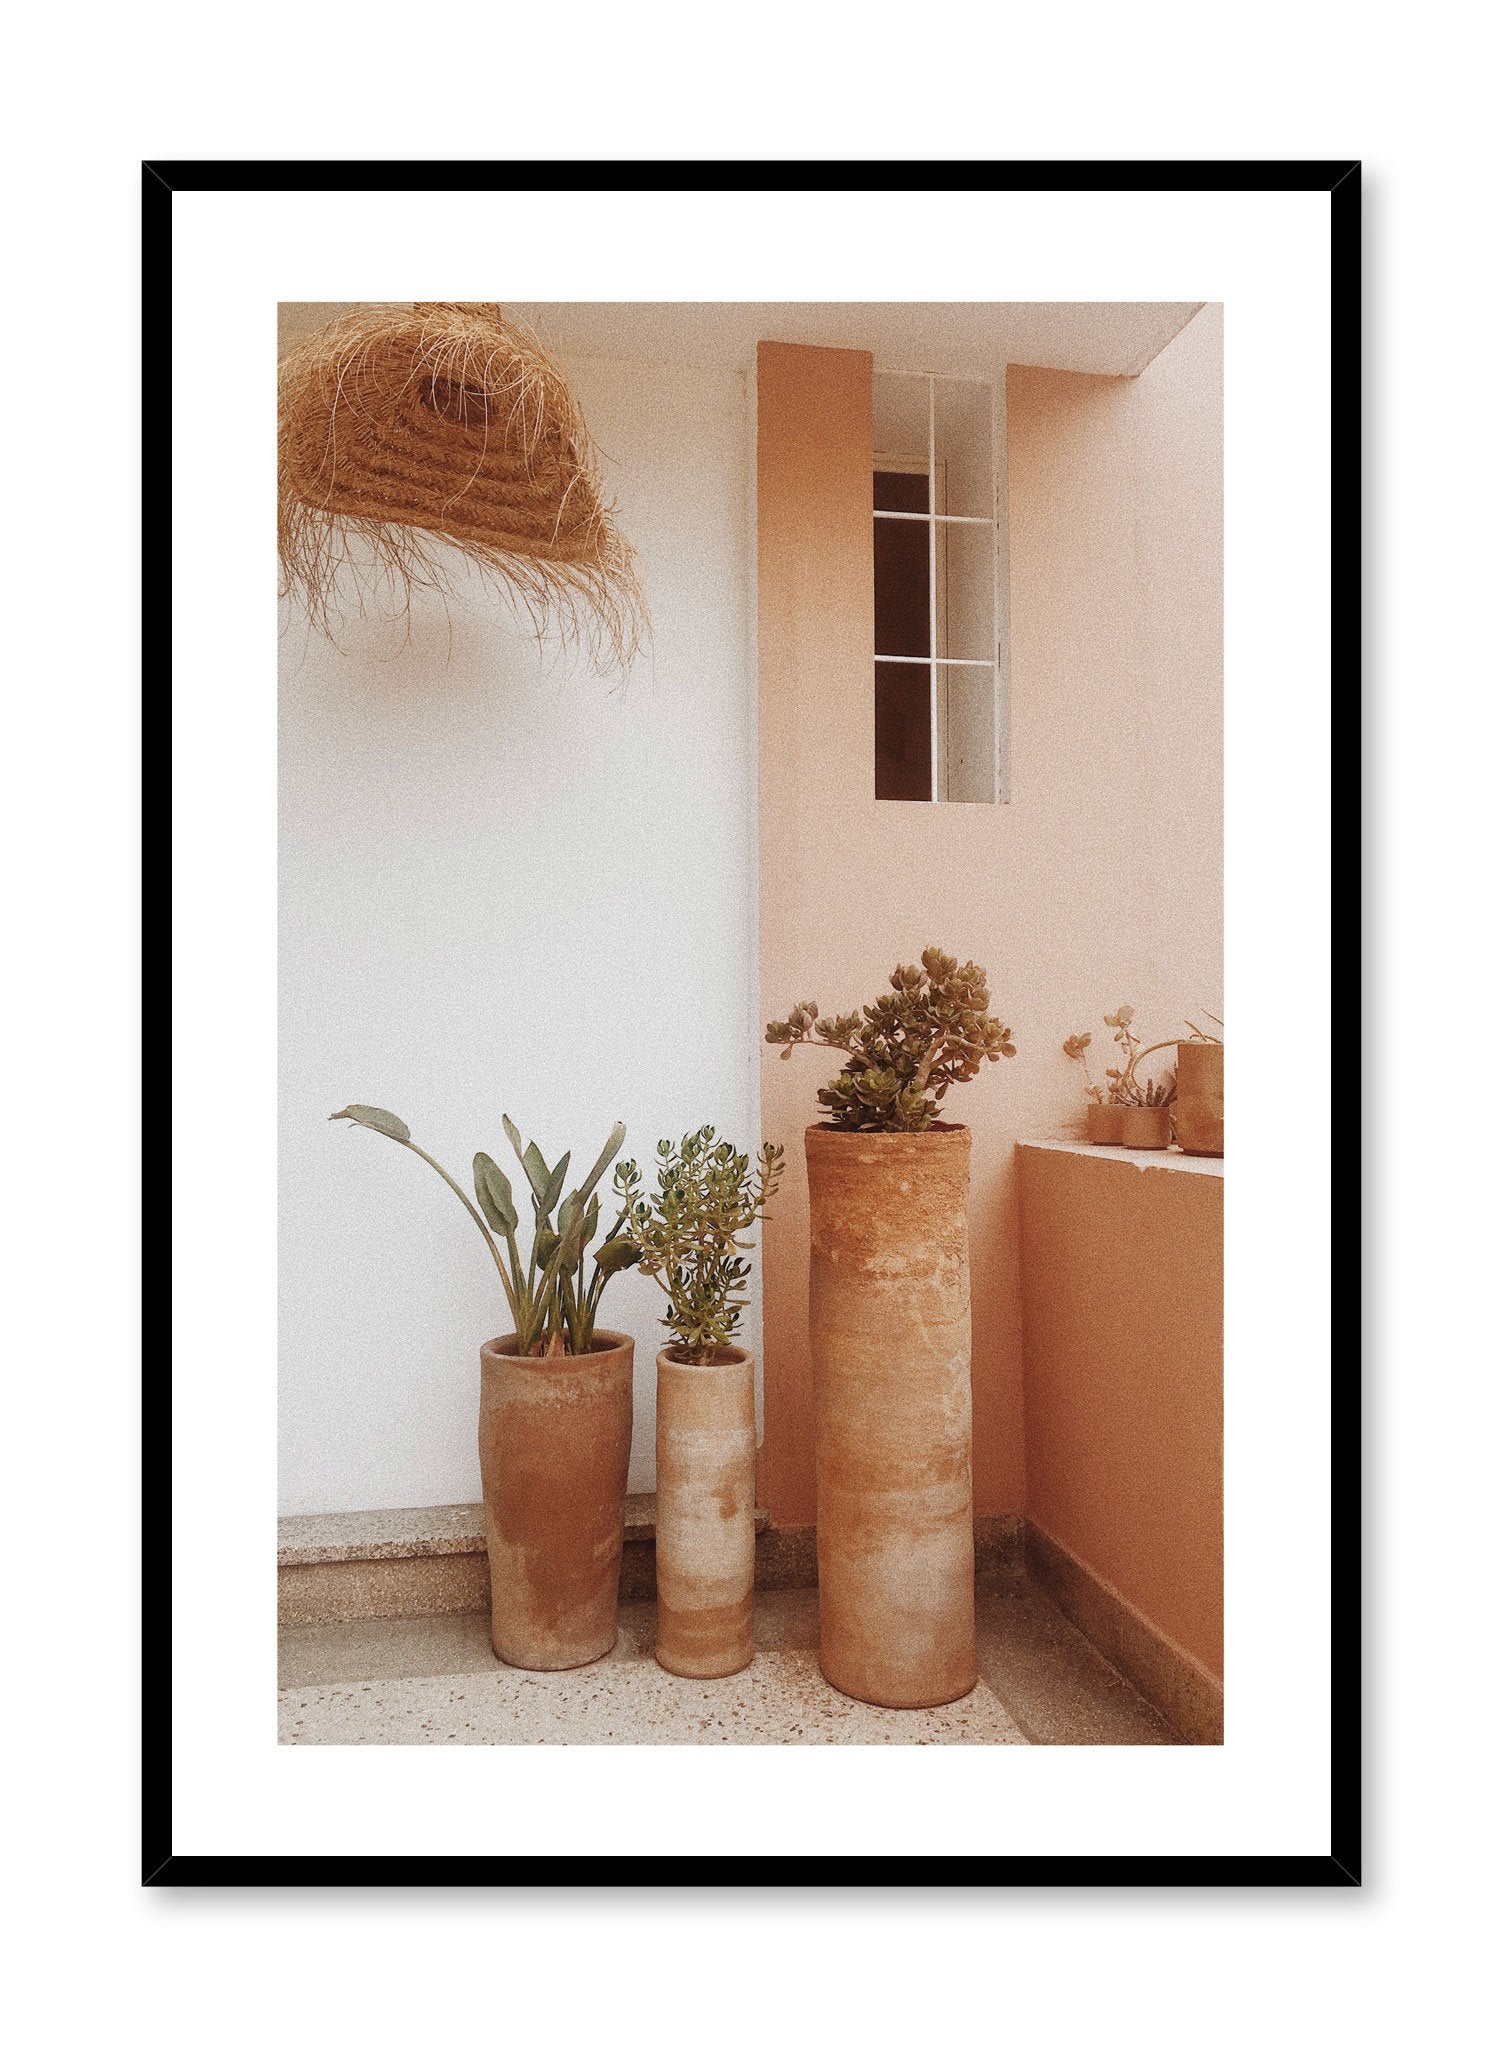 Architecture photography poster by Opposite Wall with trio of terracotta planters